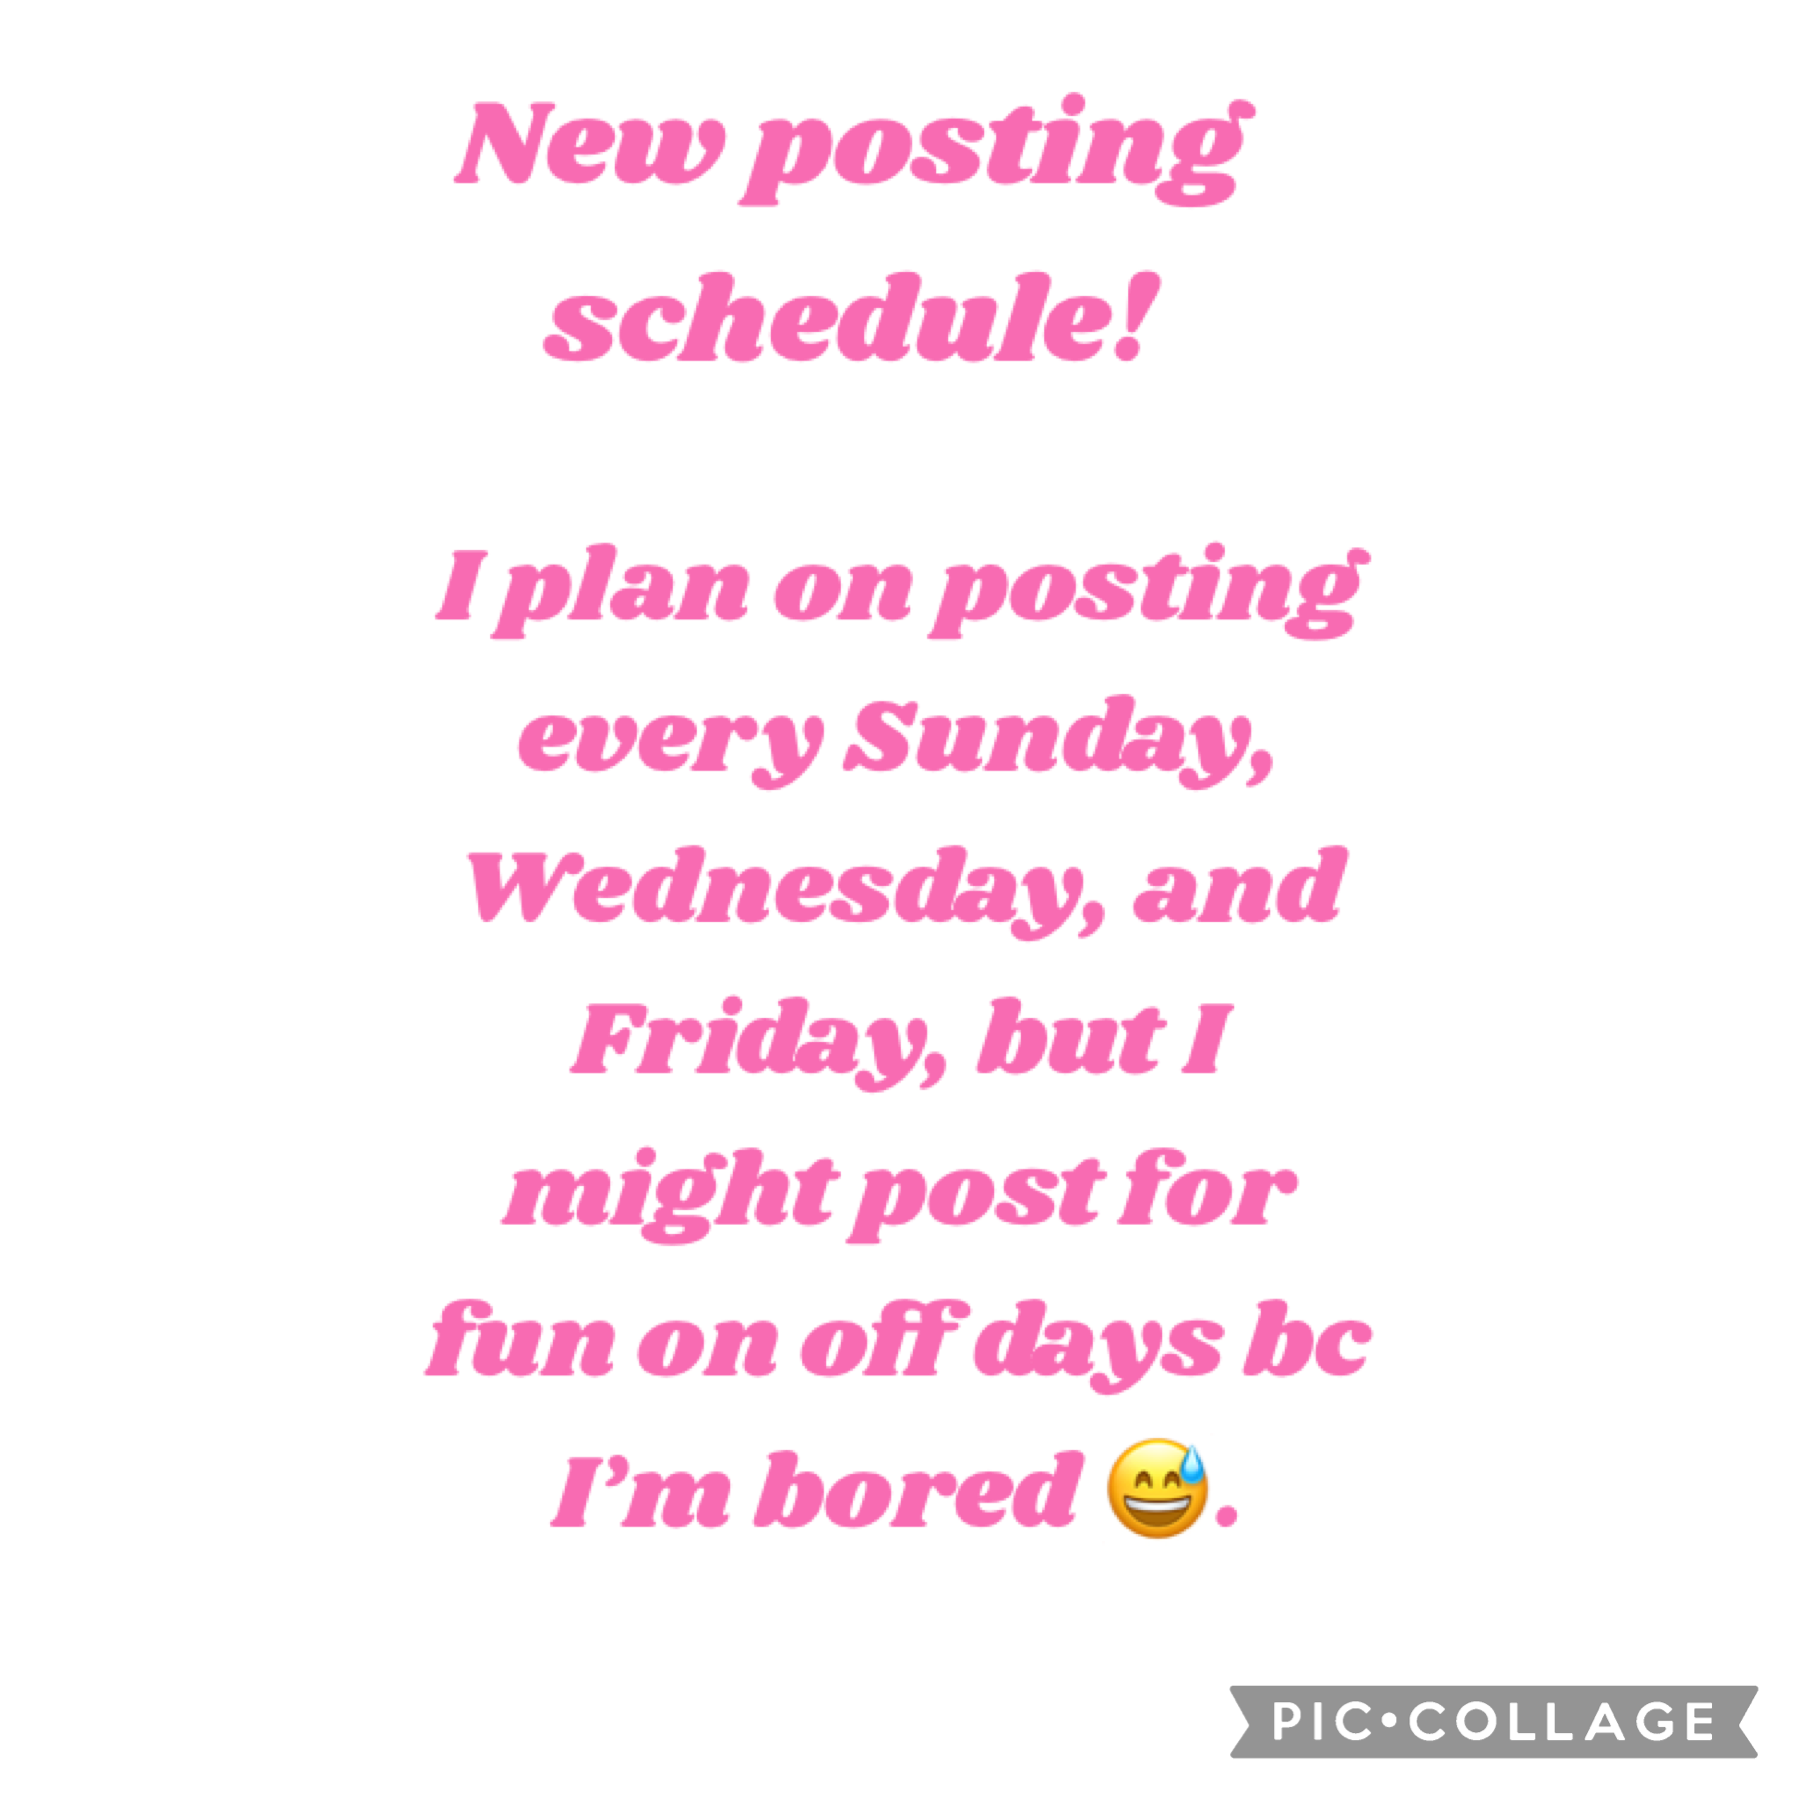 💅Tappyy💅
Don’t have much to say today 😅. But yeah, this is my new schedule! Like I said I might end up posting extra some weeks, but this is the minimum. 
Stay positive xoxo,
Pink-Petals